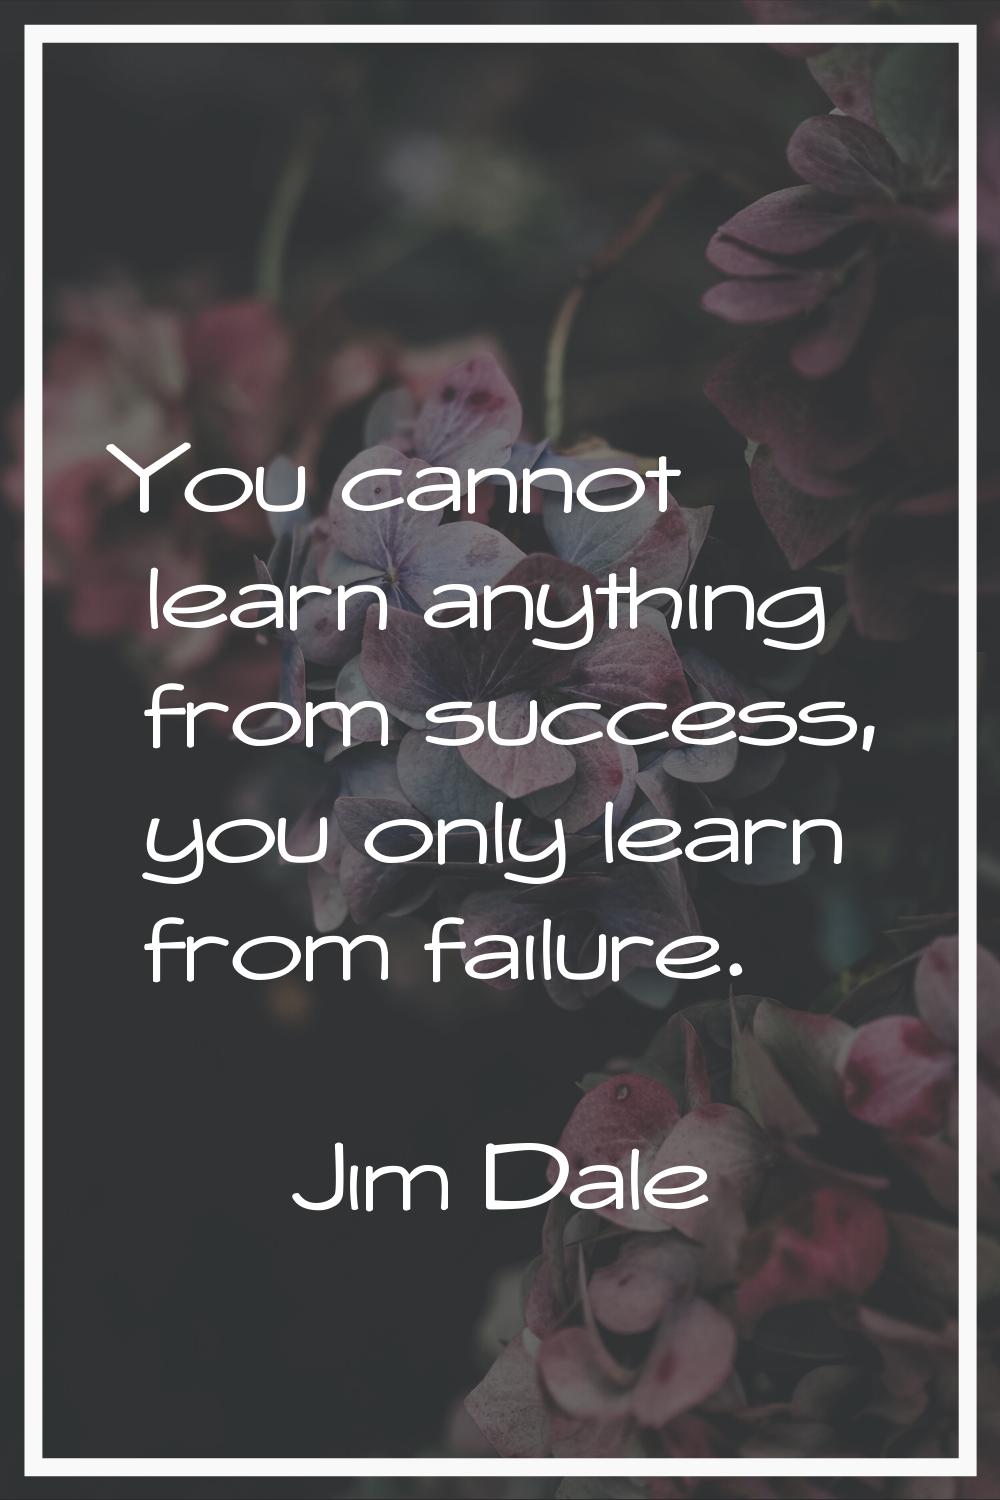 You cannot learn anything from success, you only learn from failure.